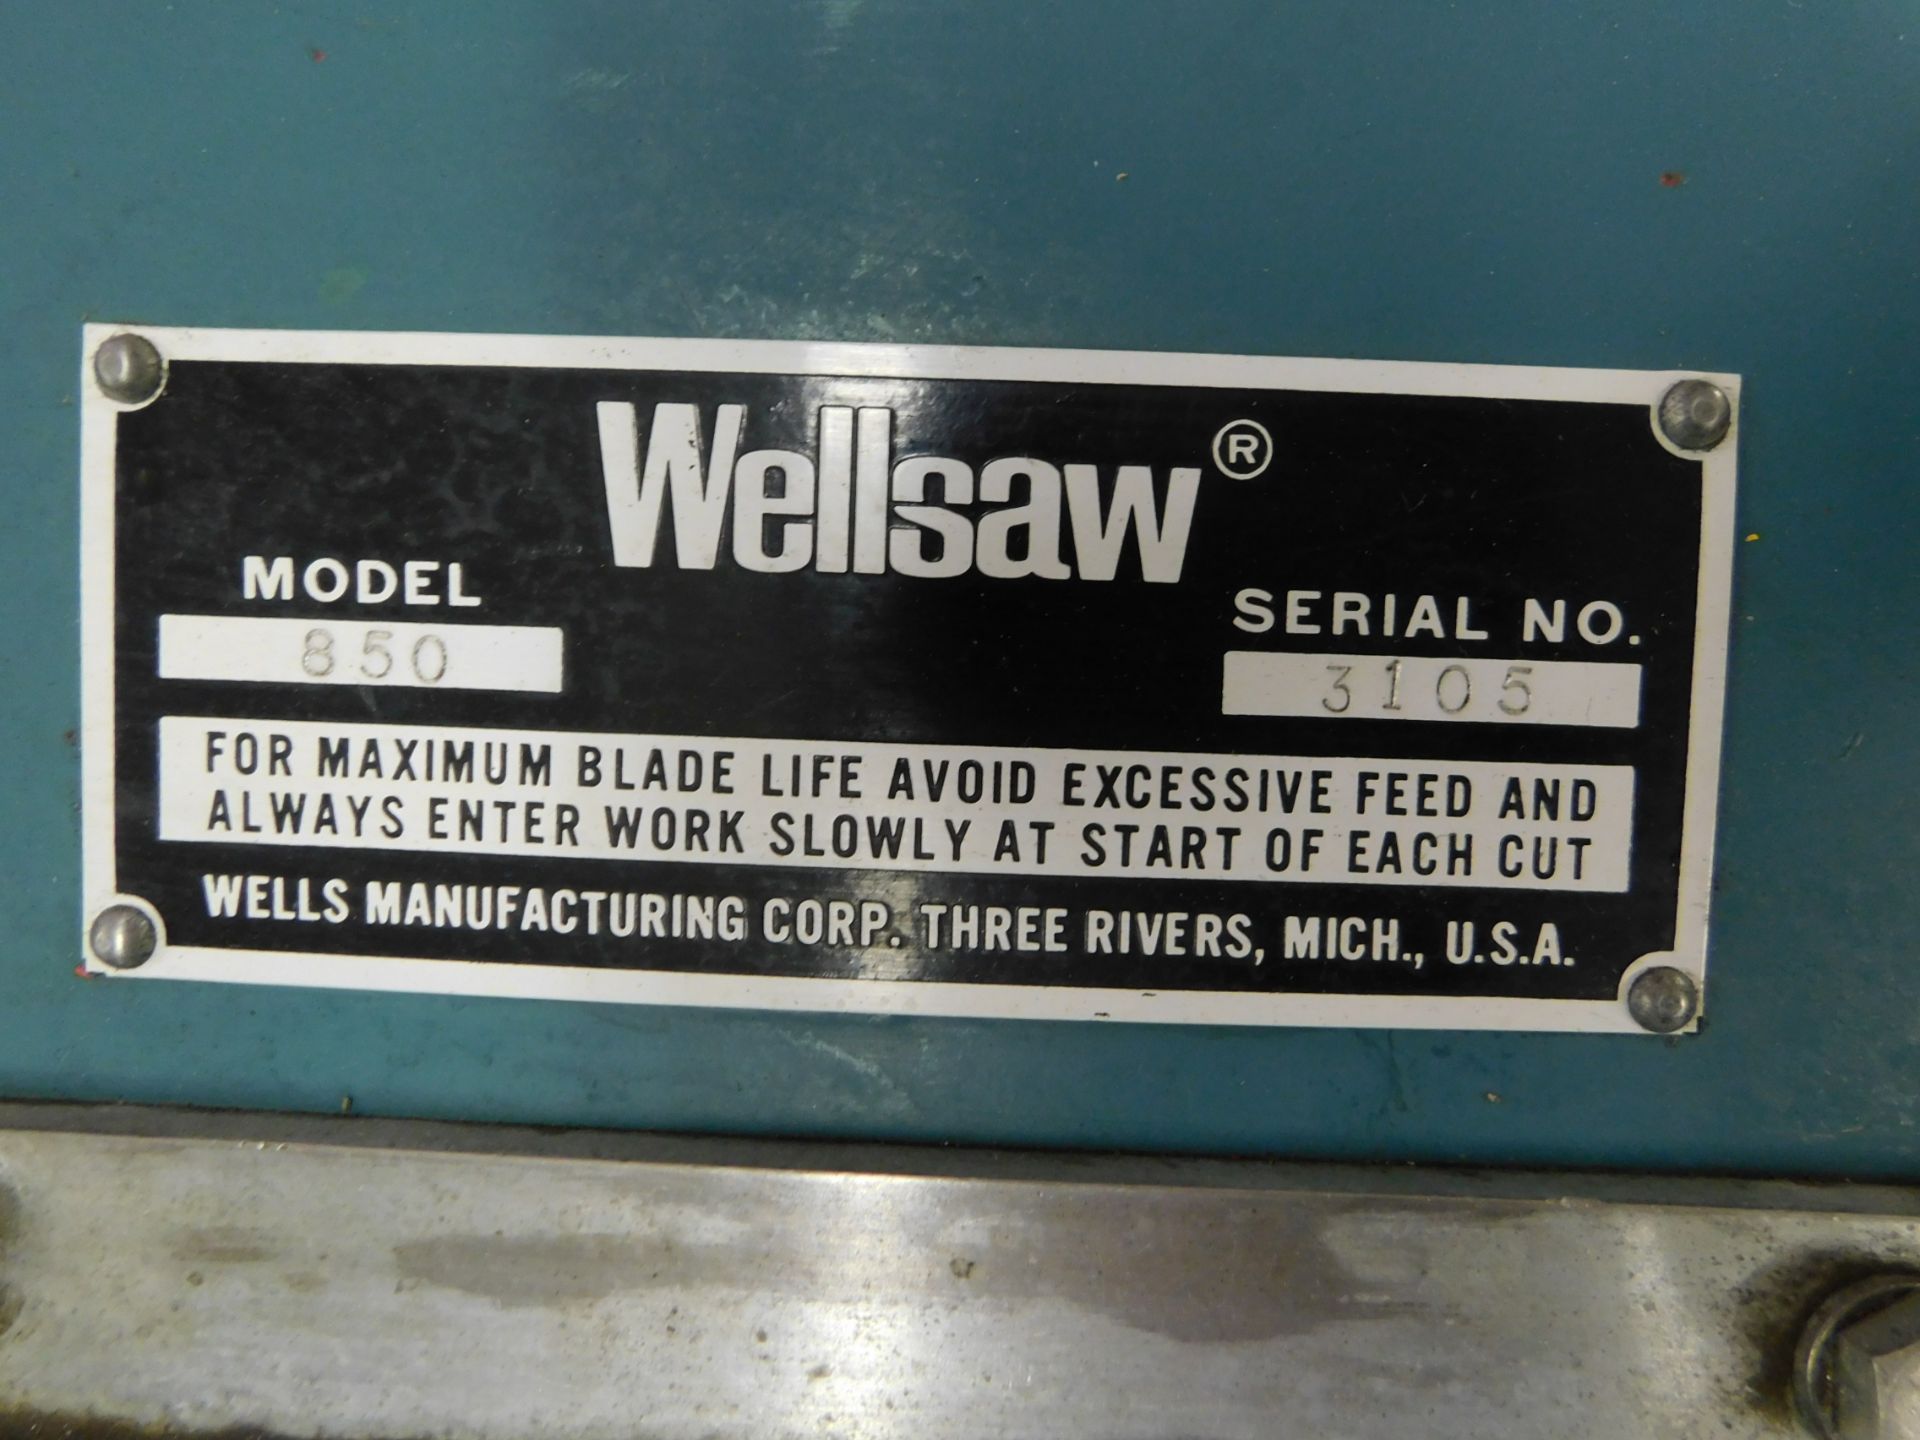 Wells Model 850 Horizontal Band Saw, 9 In. X 16 In., s/n 3105, 1 Inch Blade, Coolant - Image 8 of 8